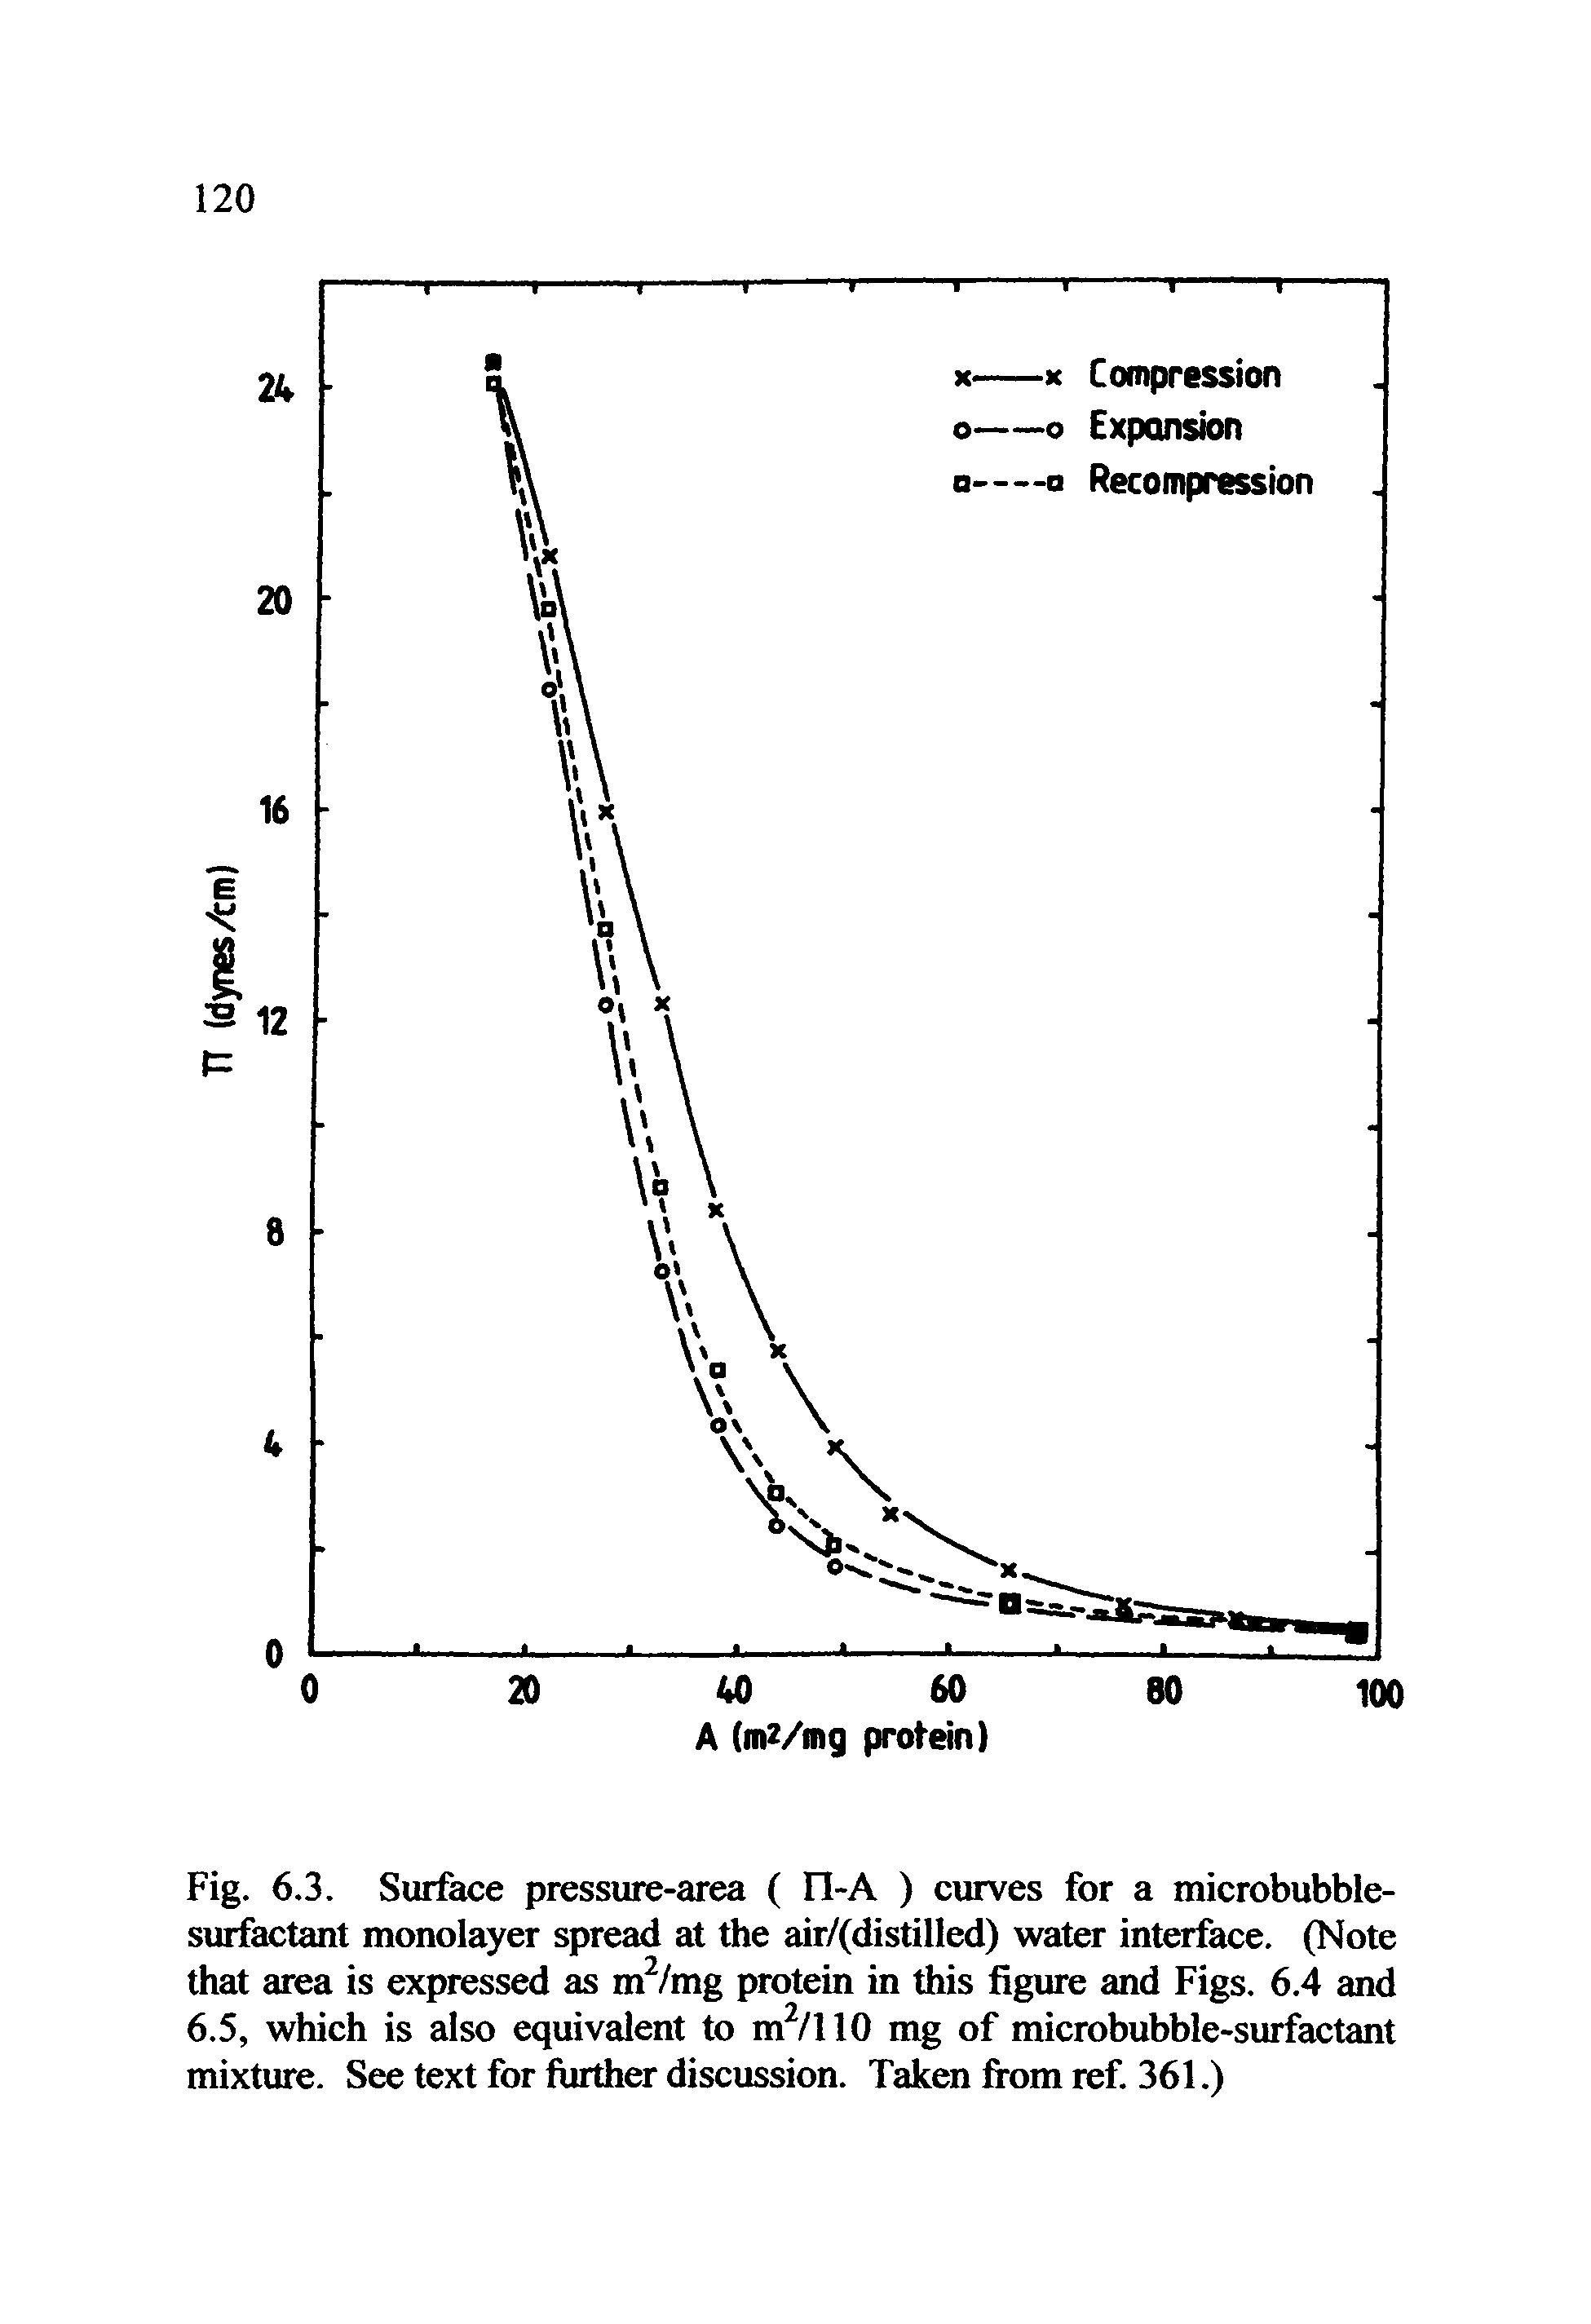 Fig. 6.3. Surface pressure-area ( II-A ) curves for a microbubble-surfactant monolayer spread at the air/(distilled) water interface. (Note that area is expressed as m2/mg protein in this figure and Figs. 6.4 and 6.5, which is also equivalent to m2/110 mg of microbubble-surfactant mixture. See text for further discussion. Taken from ref. 361.)...